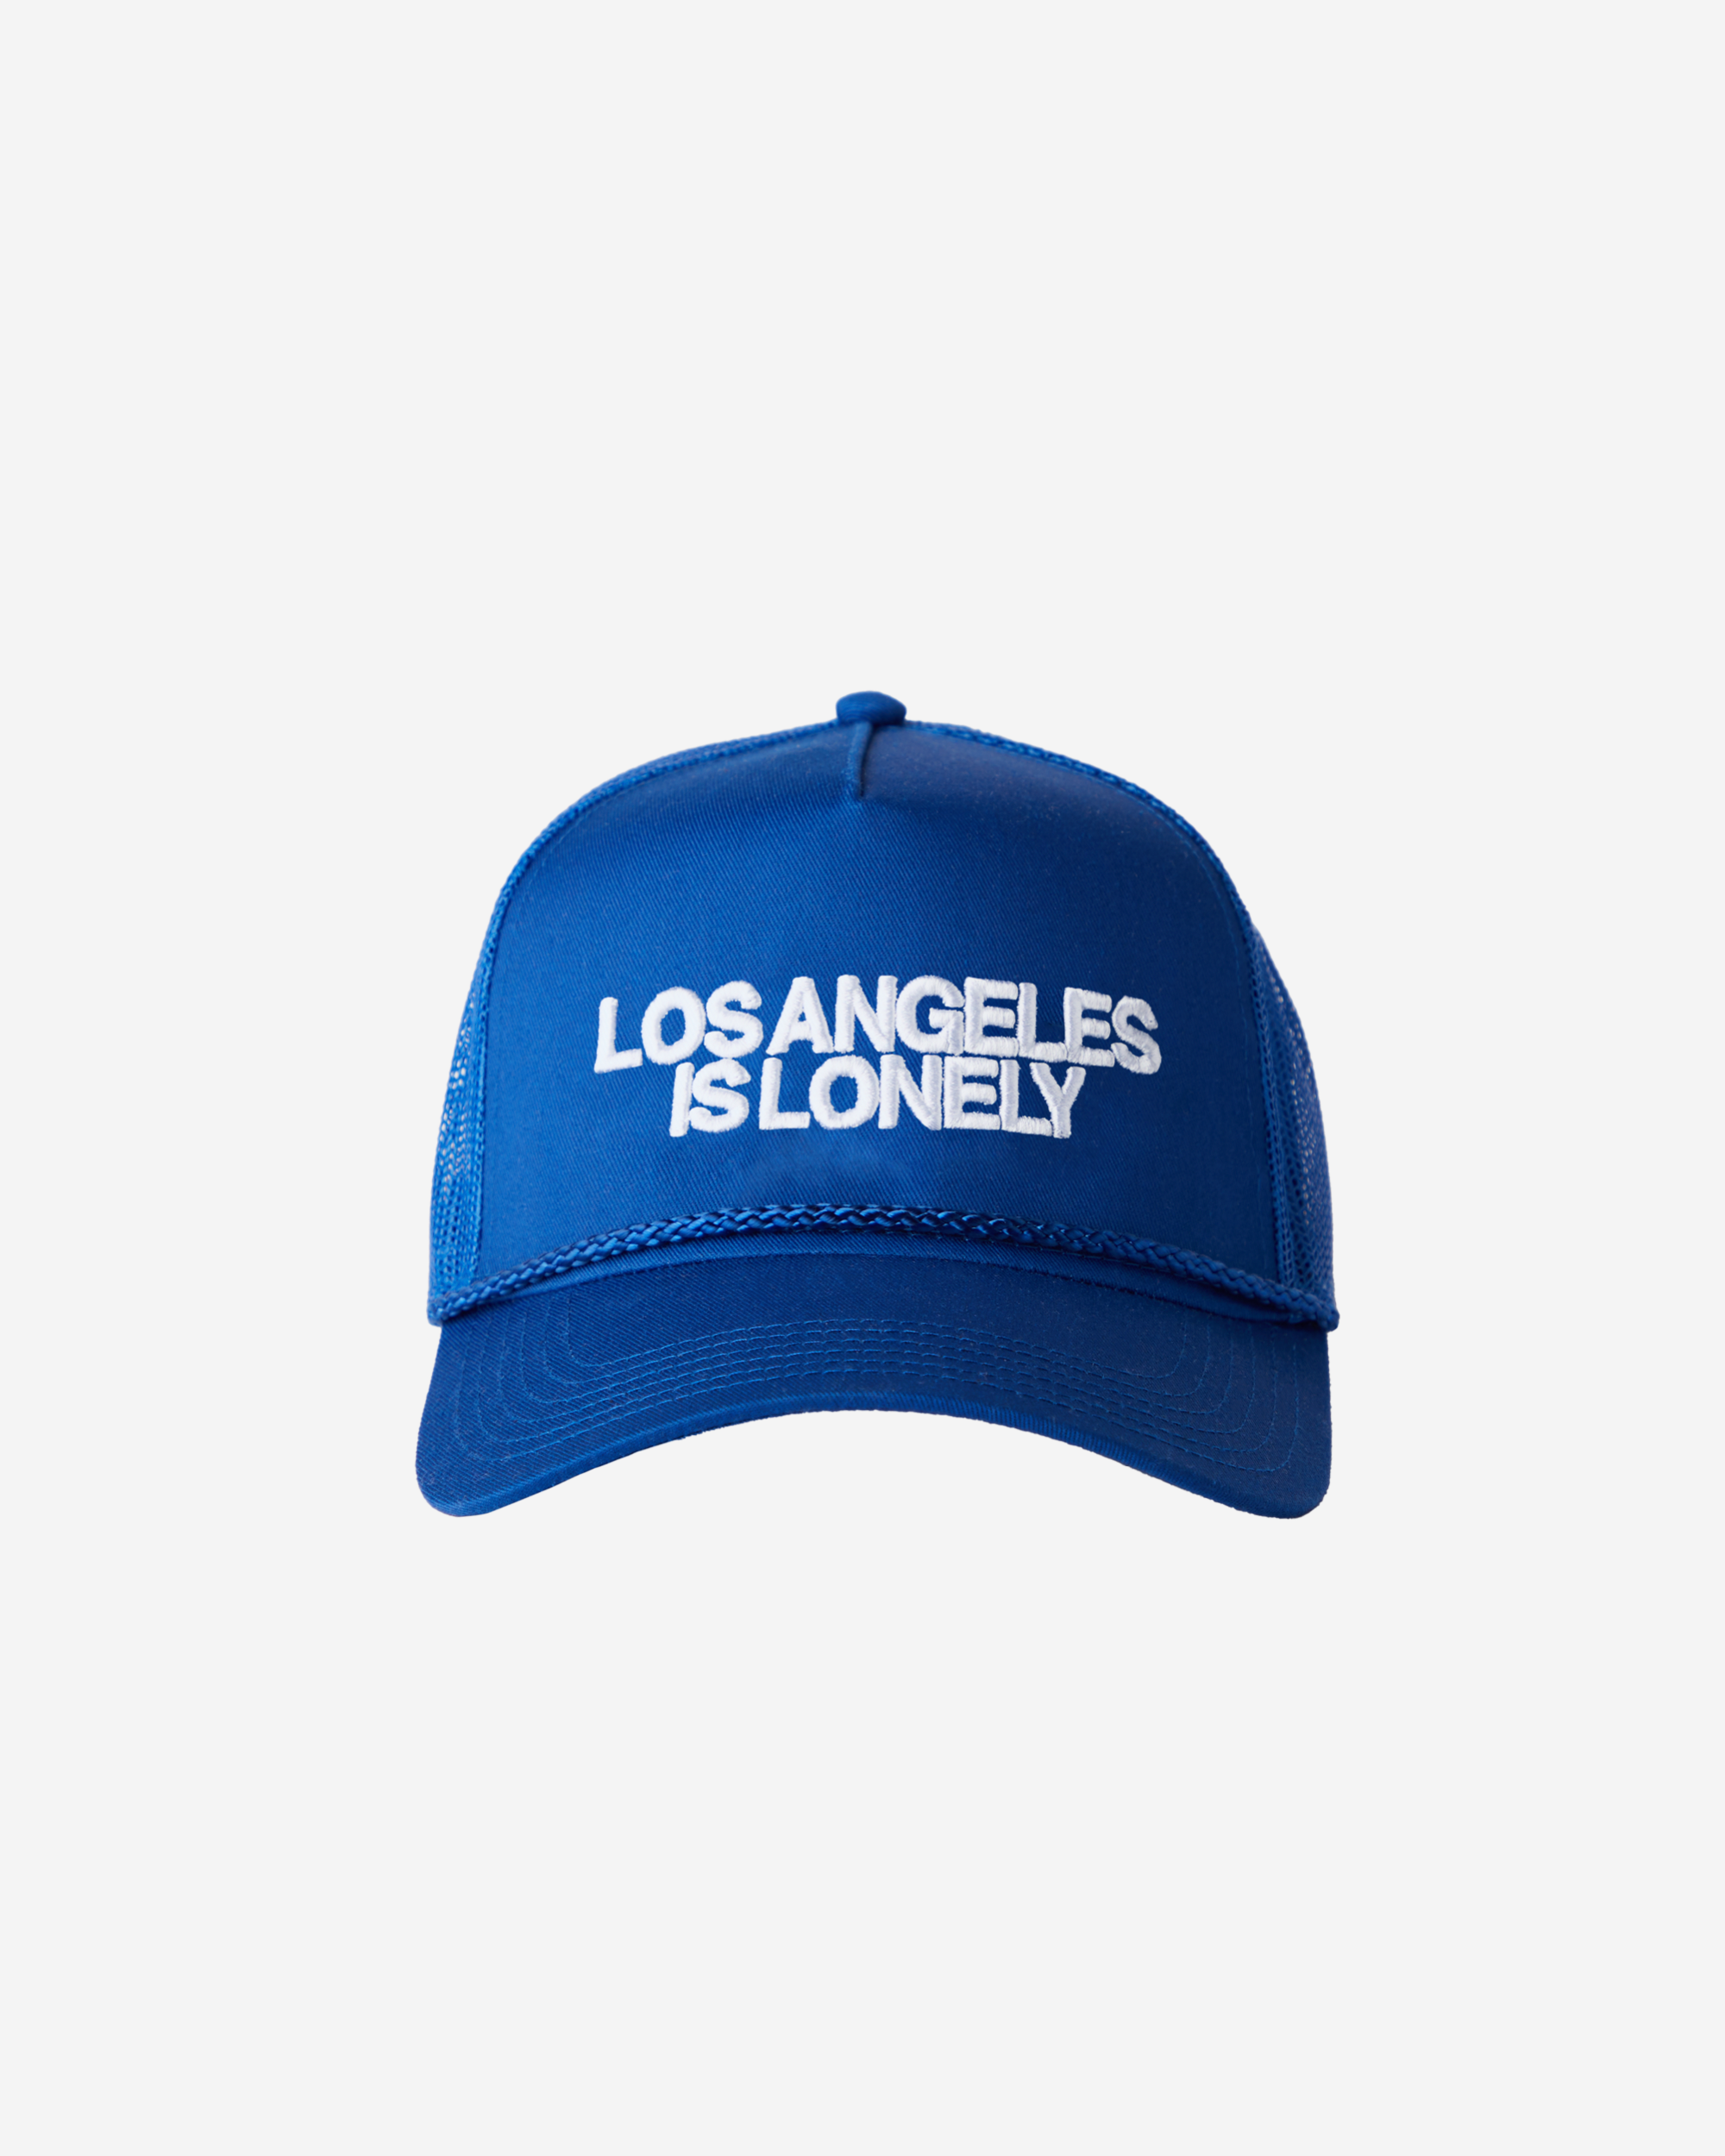 Los Angeles is Lonely Hat